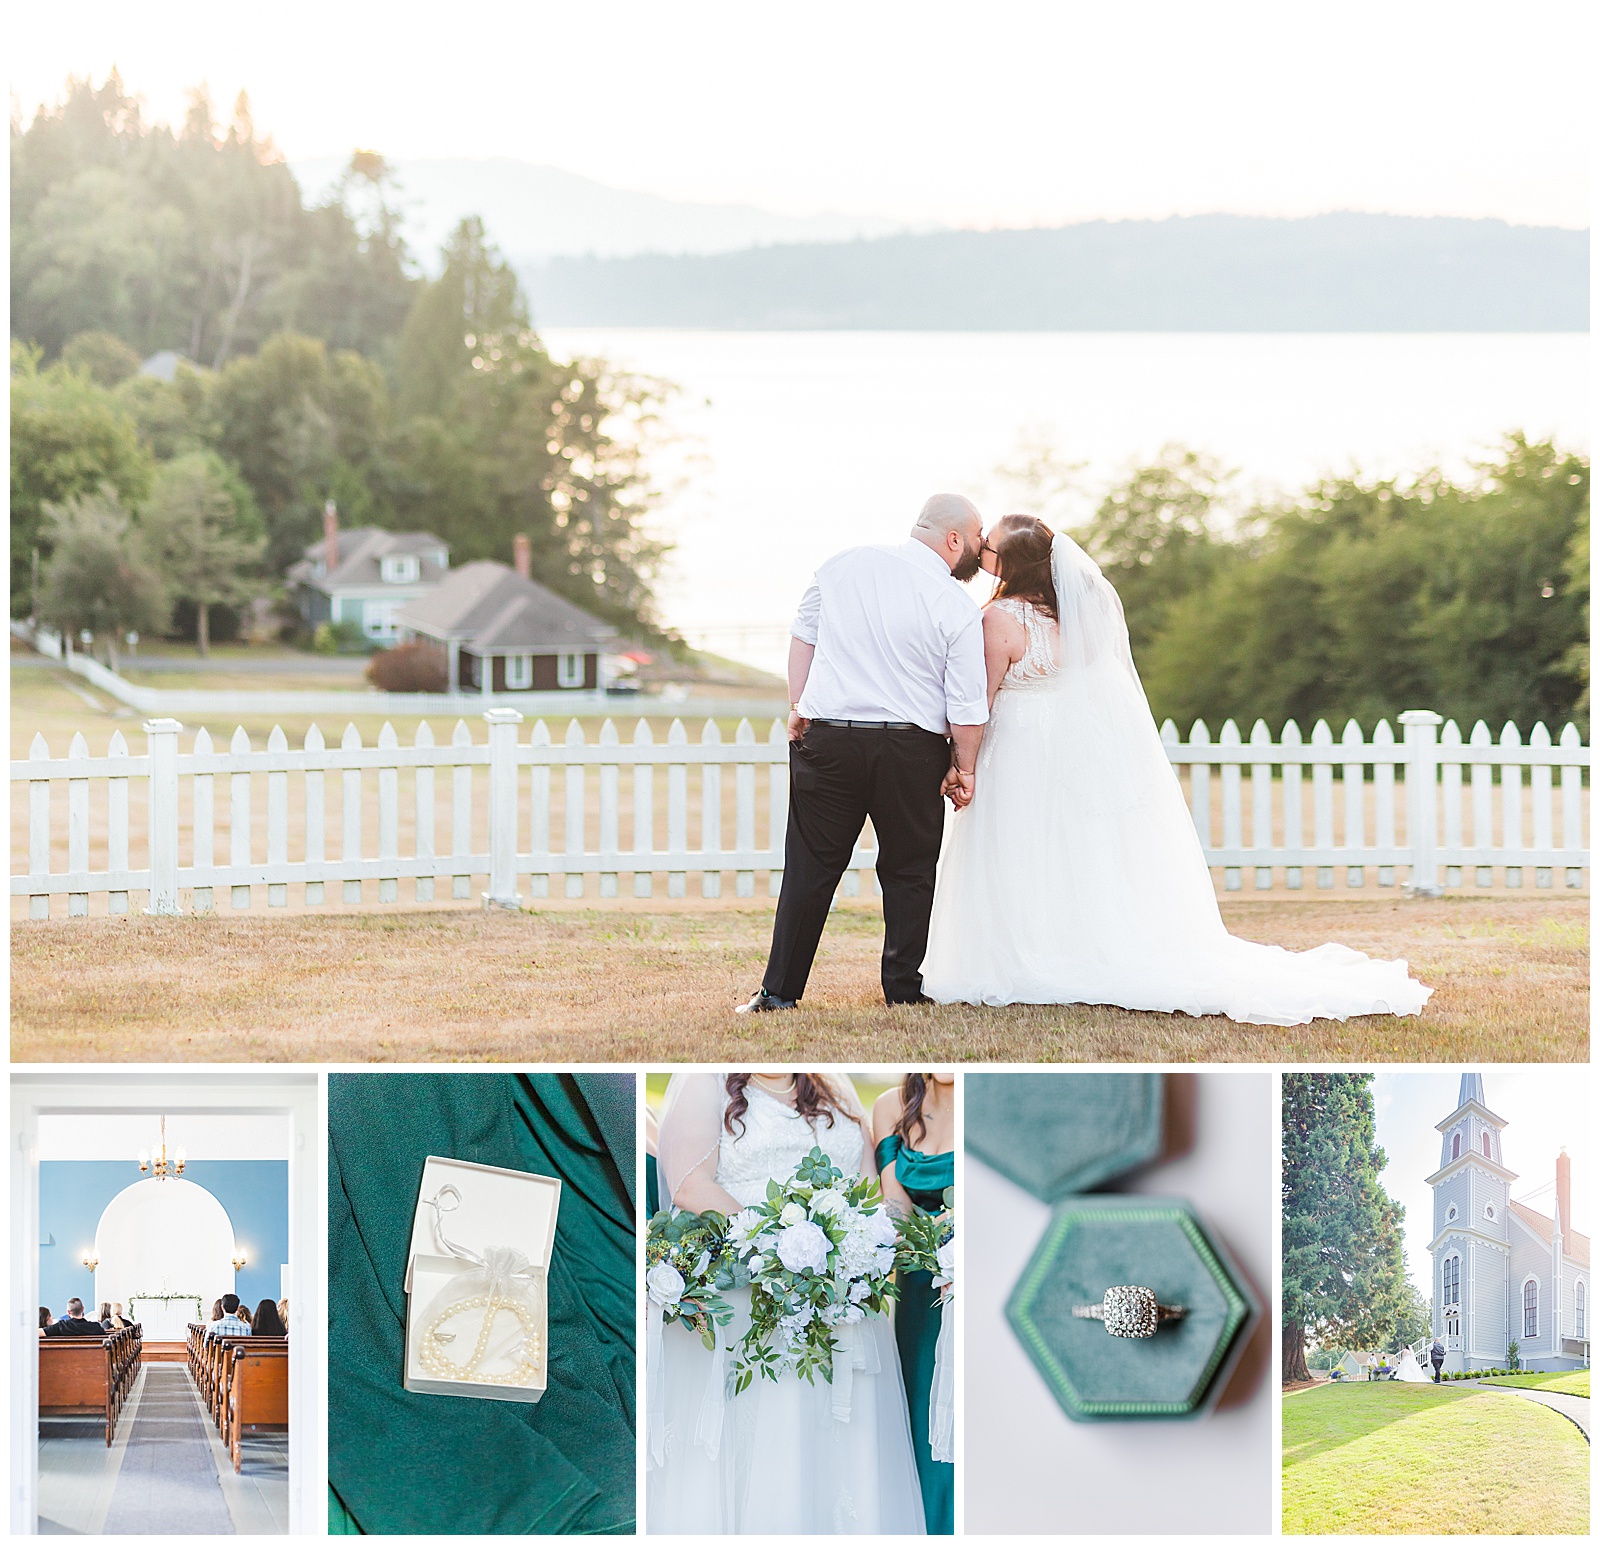 blog header image, groom and bride kissing, st pauls church alter, close up of pearls on emerald green dress, bride holding silk flowers bouquet, close up of engagement ring in emerald green ring box, bride and groom walking up the path to st pauls church